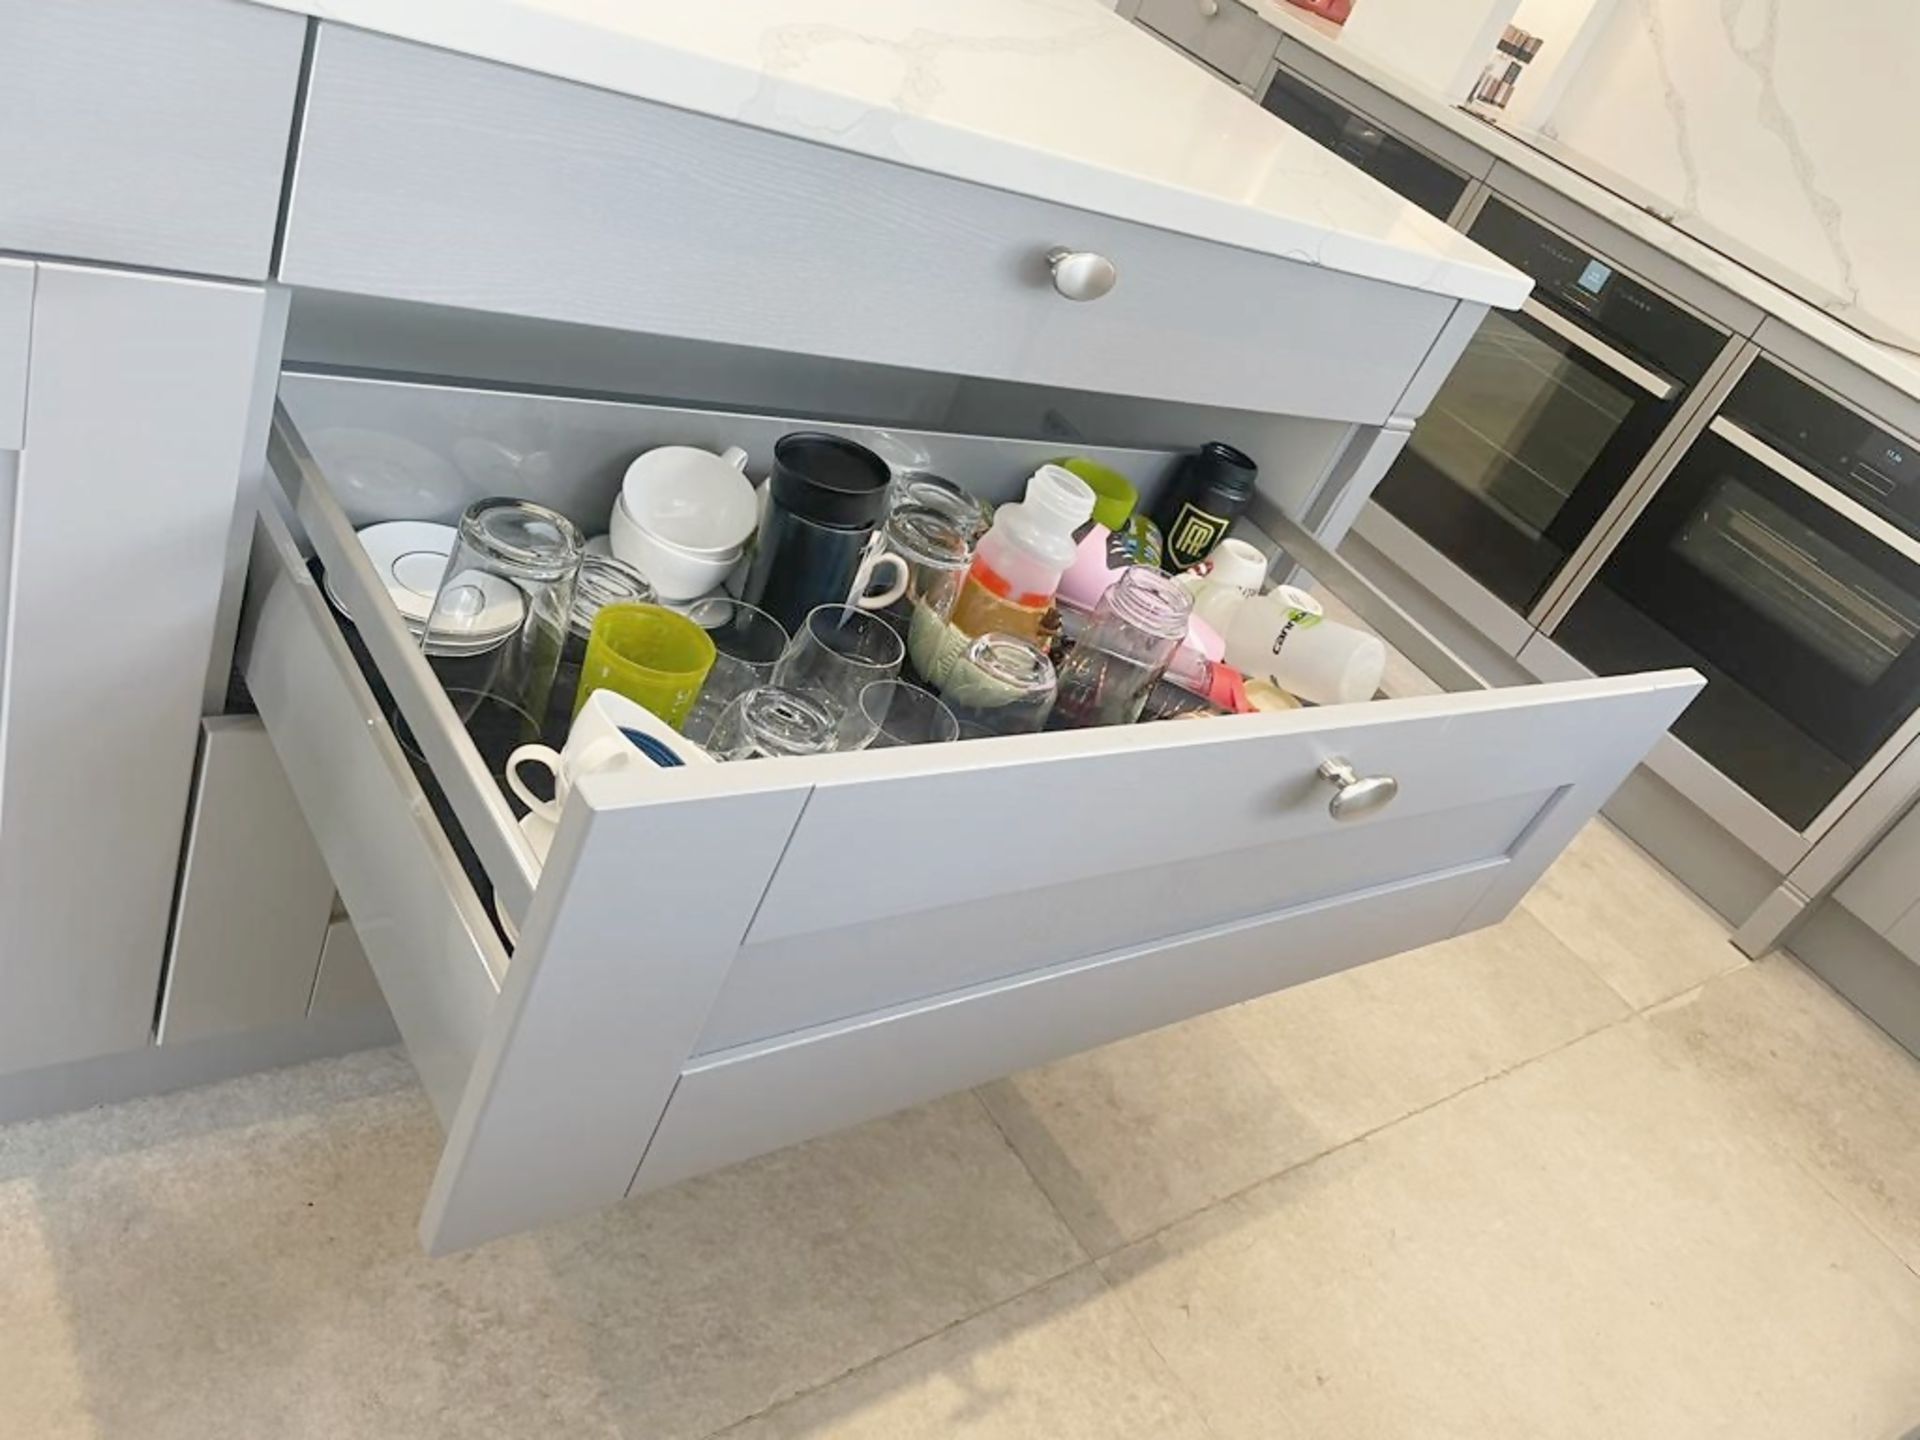 1 x SIEMATIC Bespoke Shaker-style Fitted Kitchen, Utility Room, Appliances & Modern Quartz Surfaces - Image 48 of 99